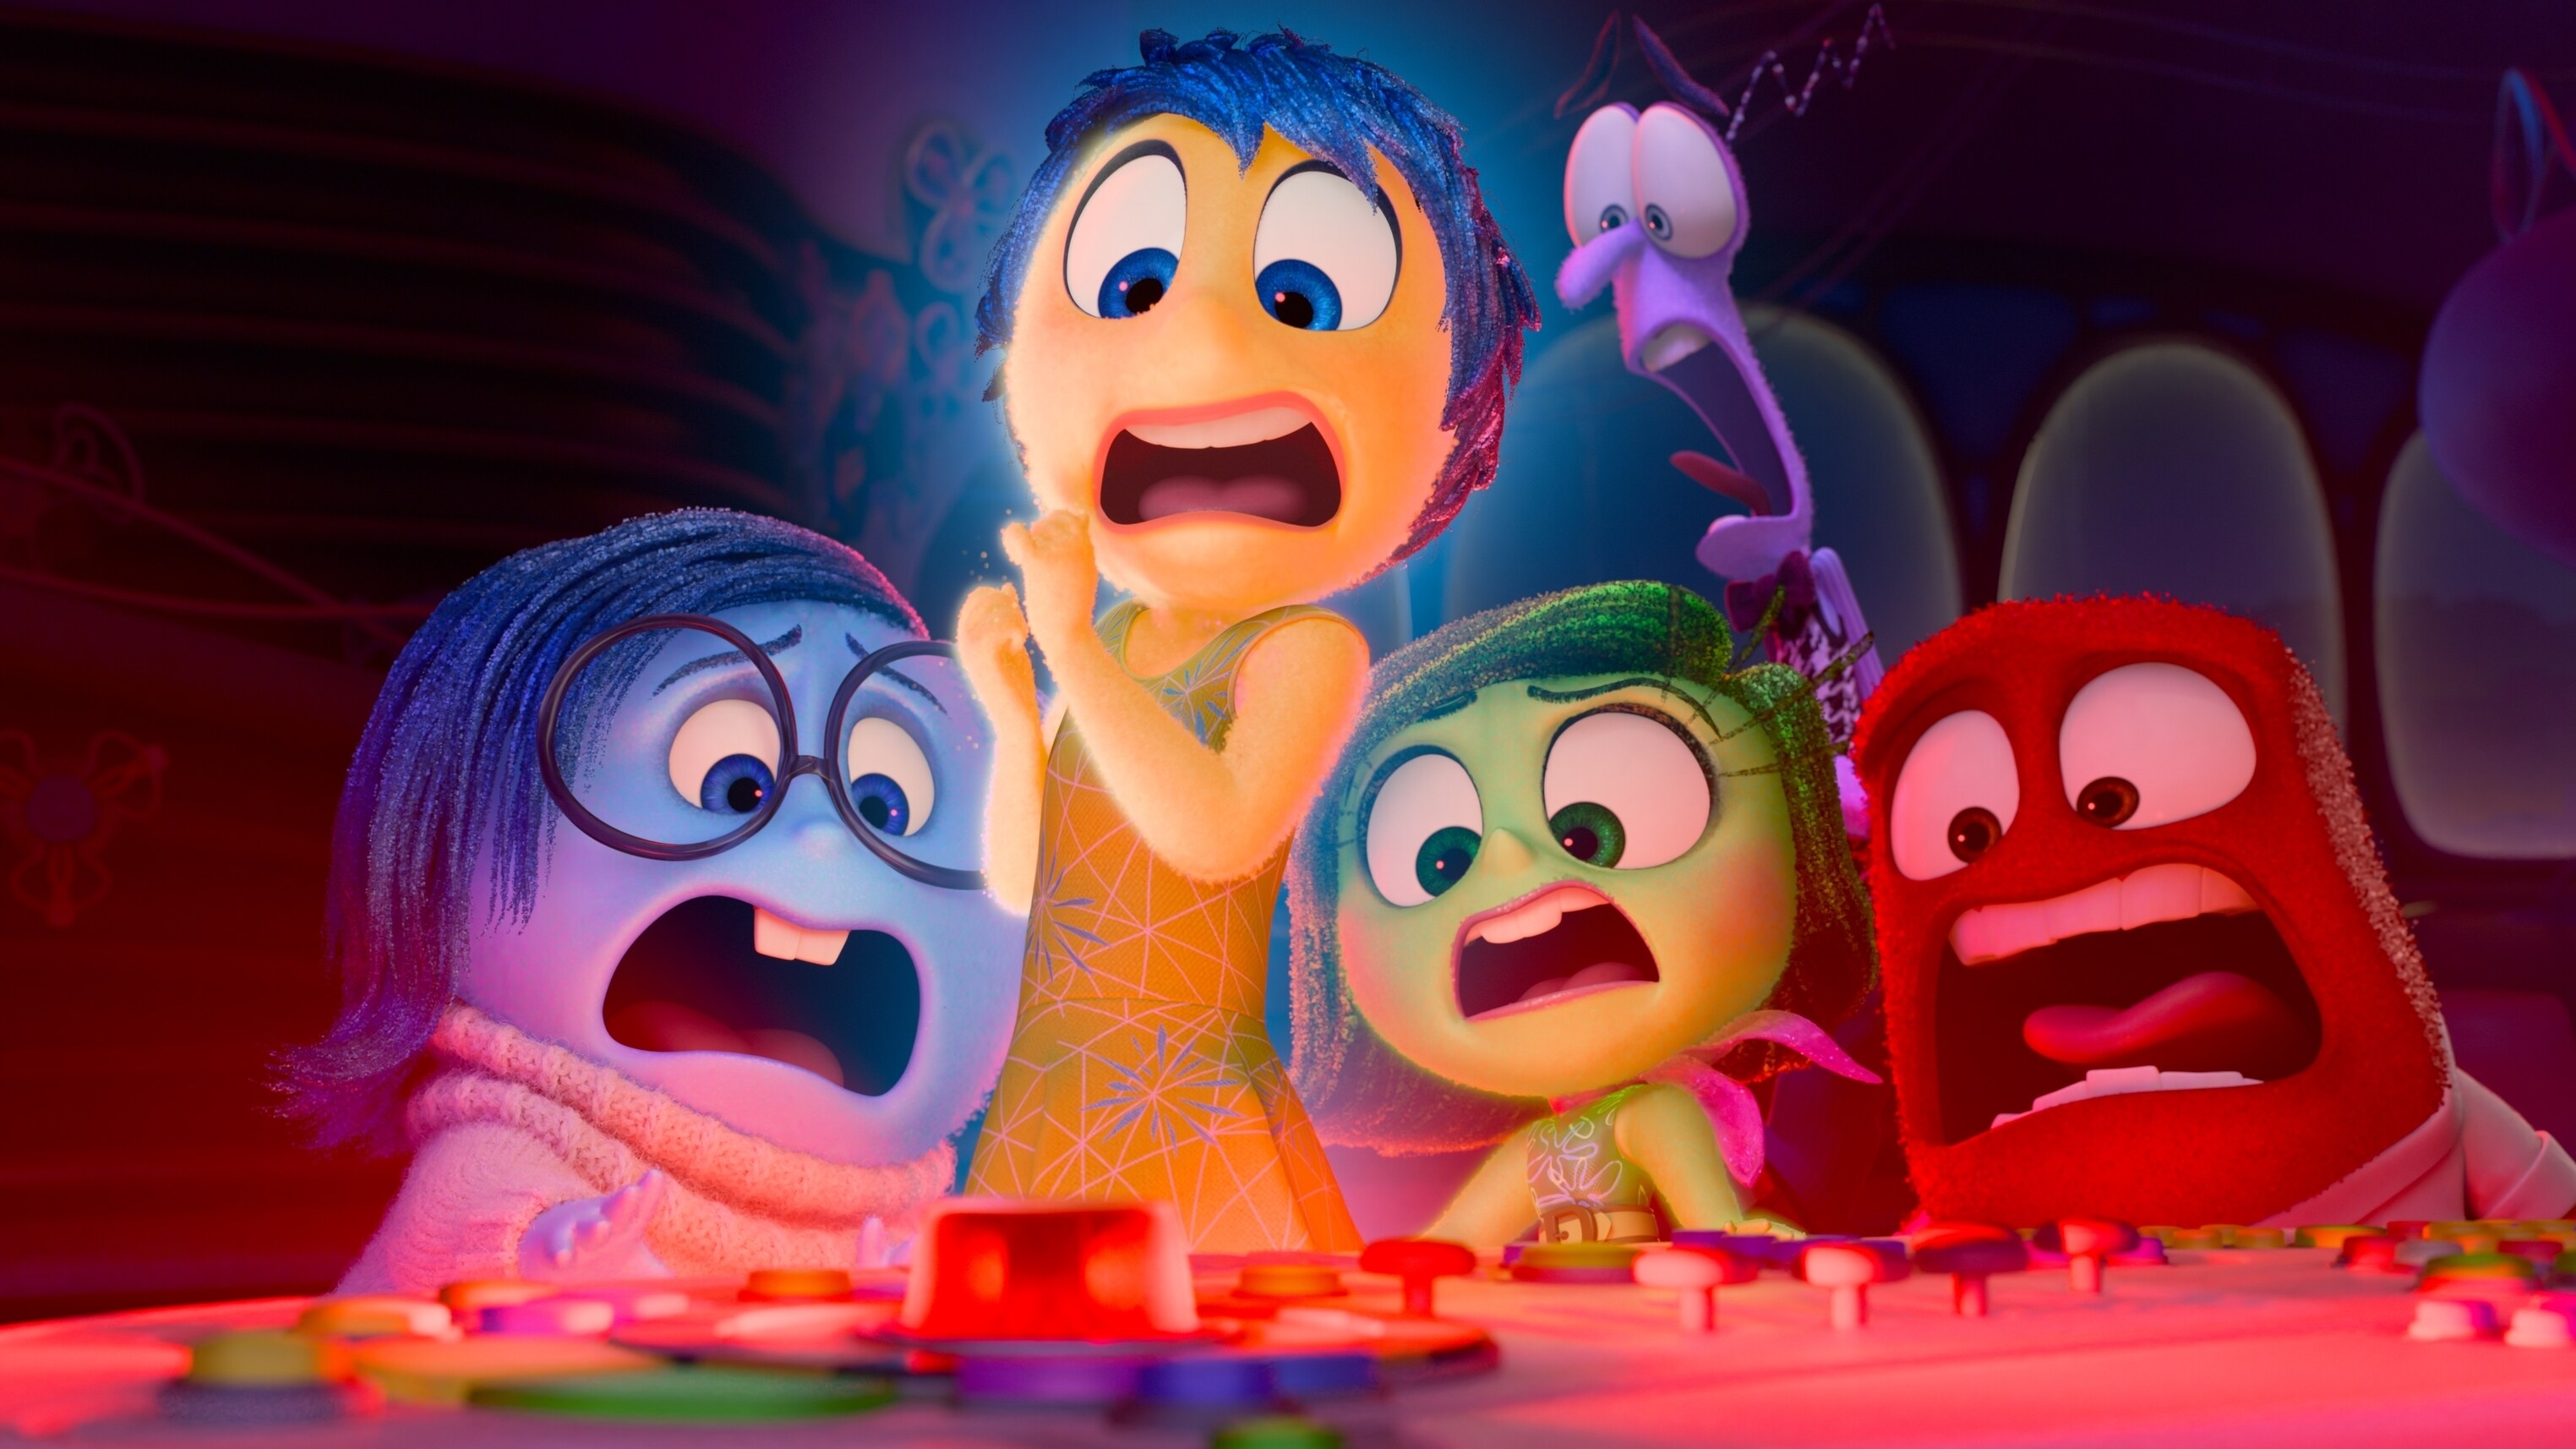 WHAT IS HAPPENING? – In Disney and Pixar’s “Inside Out 2,” Joy (voice of Amy Poehler), Sadness (voice of Phyllis Smith), Anger (voice of Lewis Black), Fear (voice of Tony Hale) and Disgust (voice of Liza Lapira) are awakened to an alarming reality: everything is changing now that Riley is 13. Directed by Kelsey Mann and produced by Mark Nielsen, “Inside Out 2” releases only in theatres June 13 2024. © 2023 Disney/Pixar. All Rights Reserved.